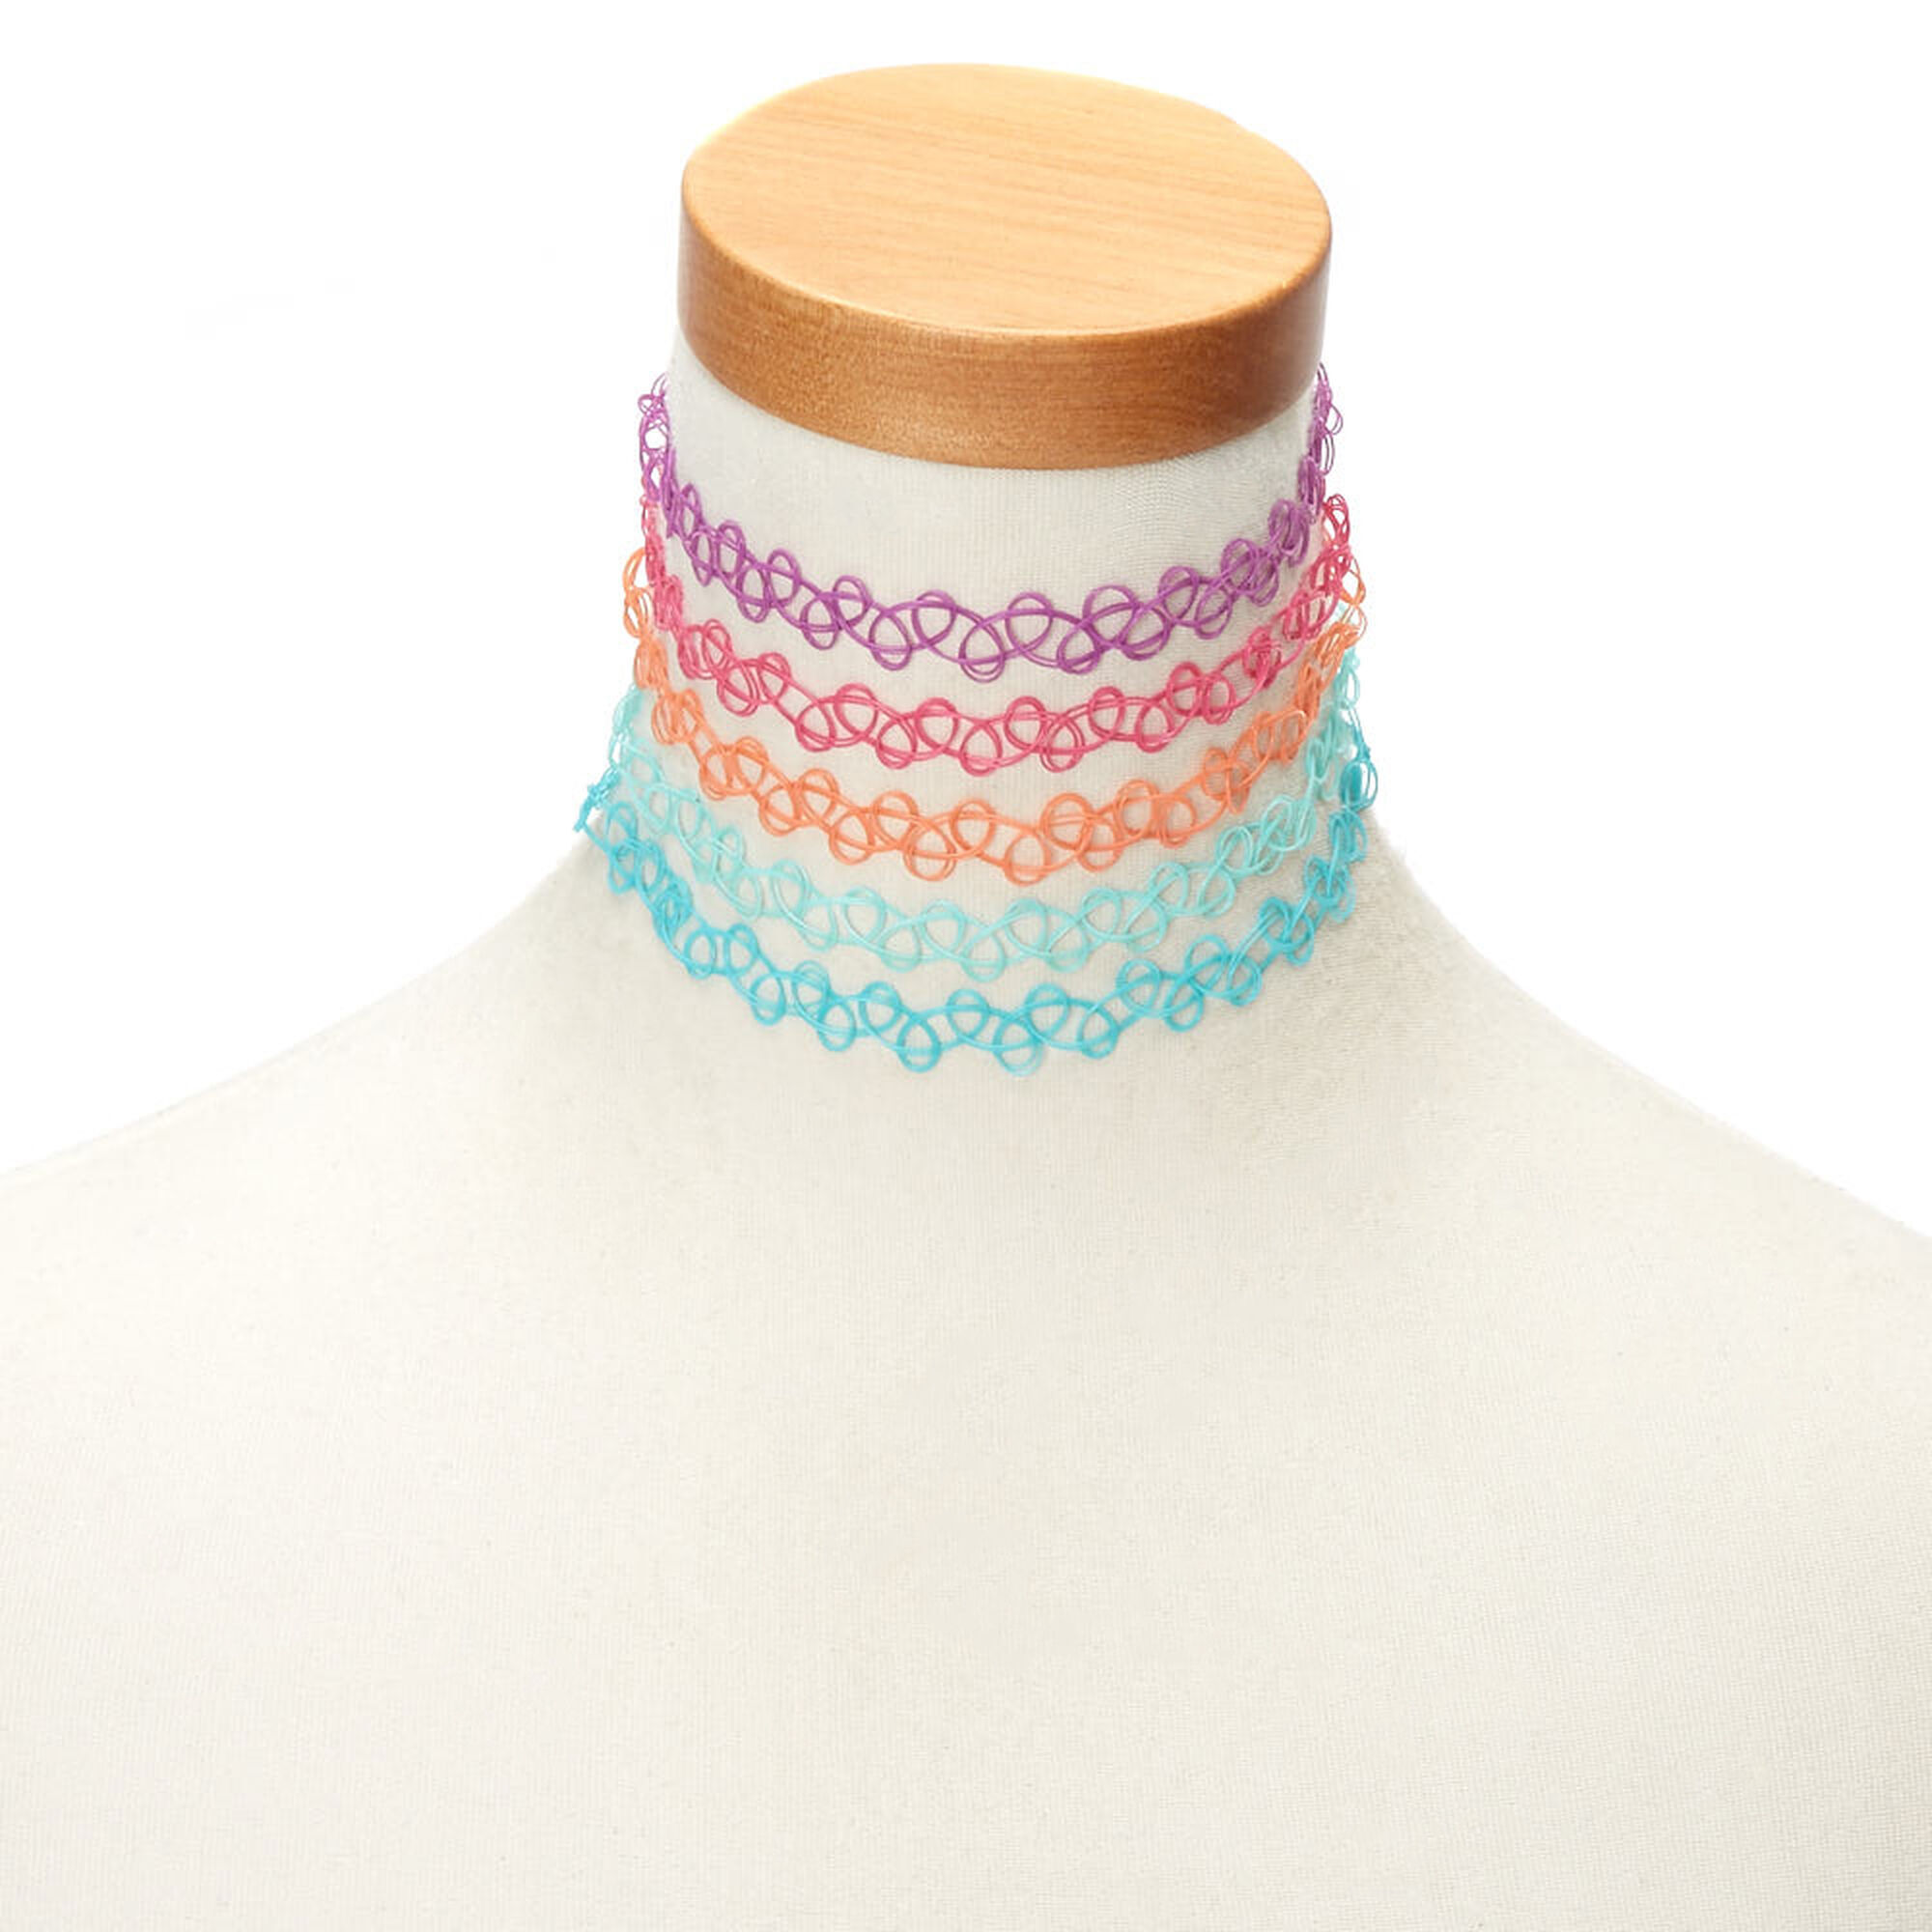 View Claires Summer Tattoo Choker Necklaces 5 Pack information